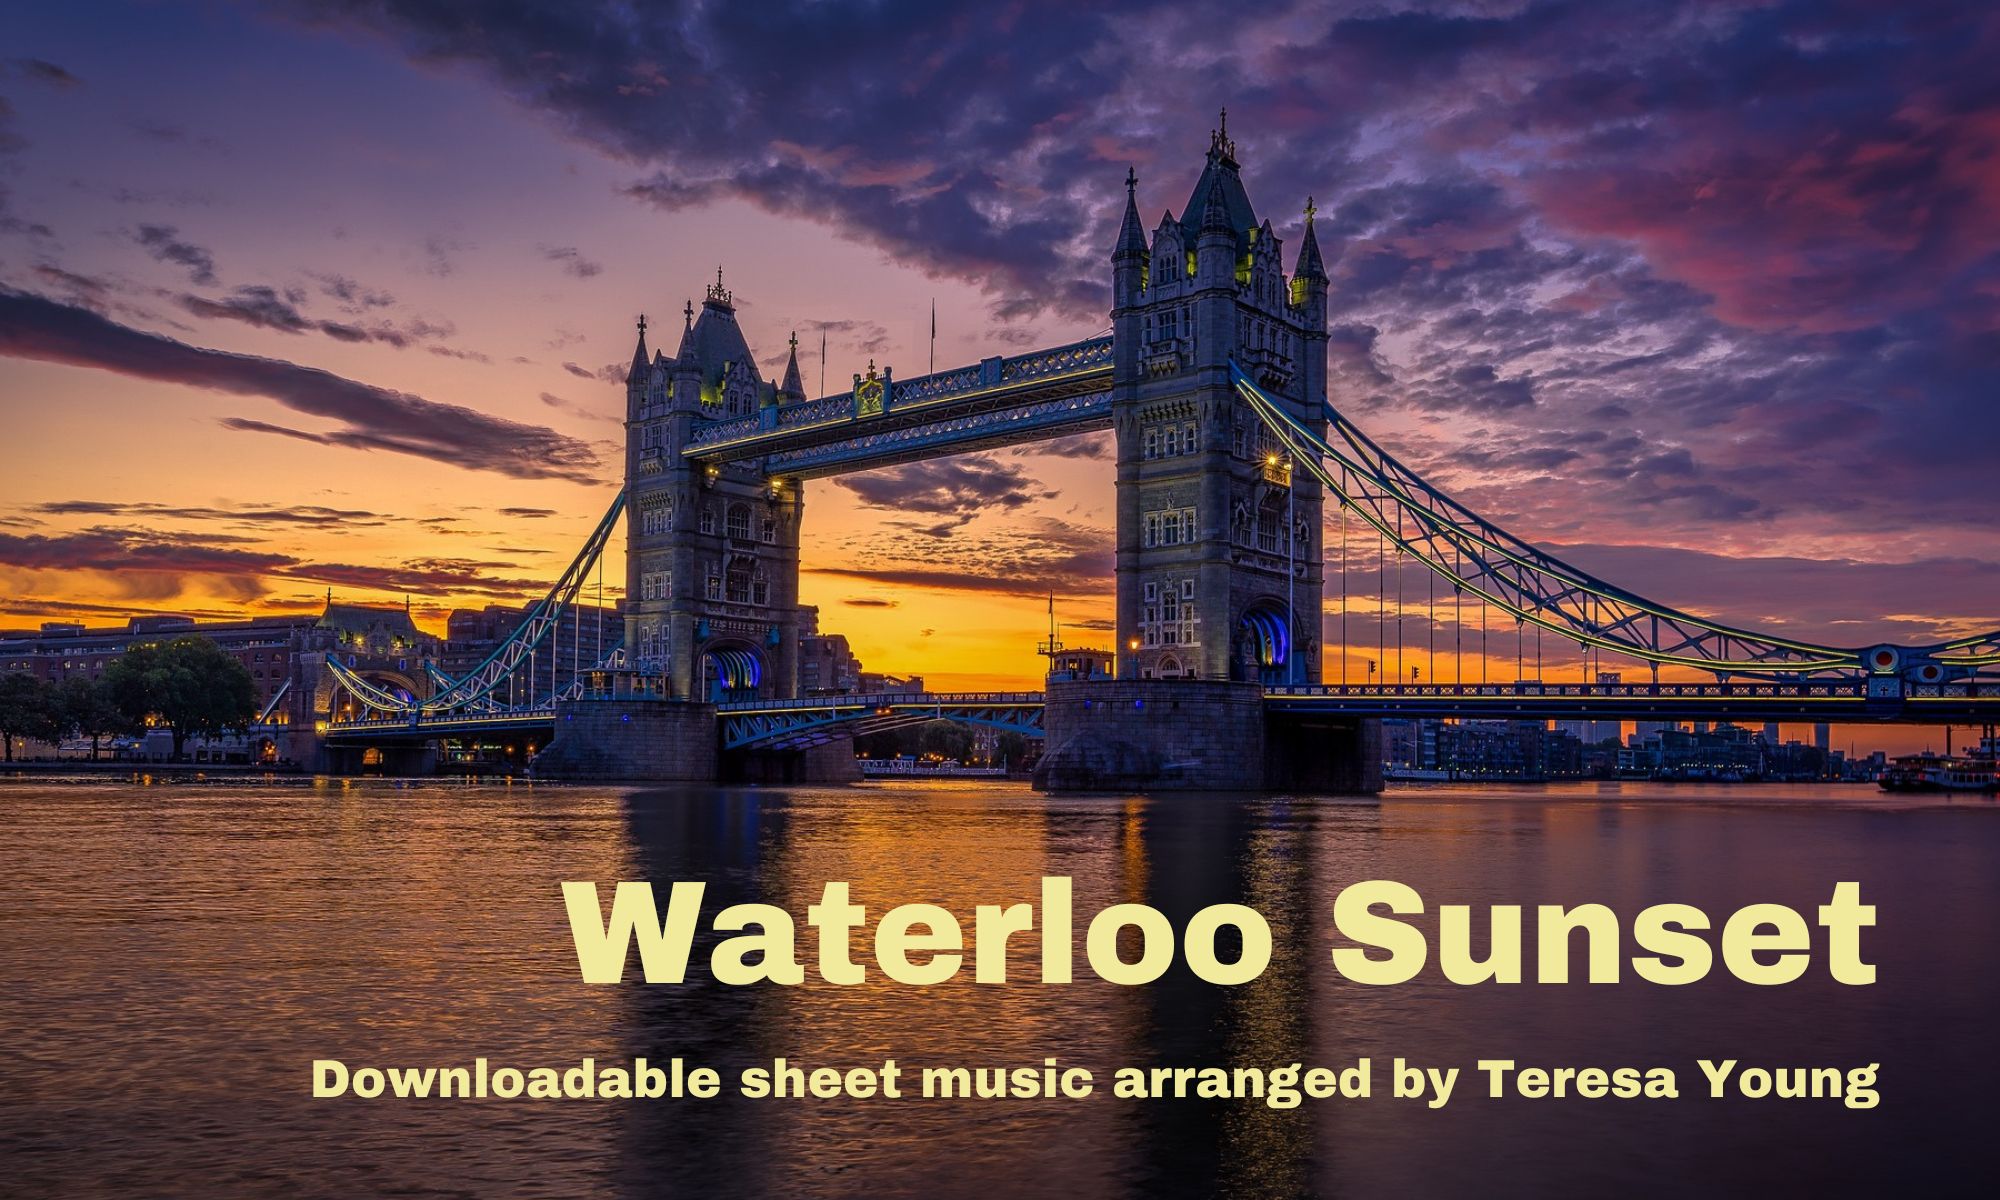 Waterloo Sunset, downloadable sheet music arr. by Teresa Young